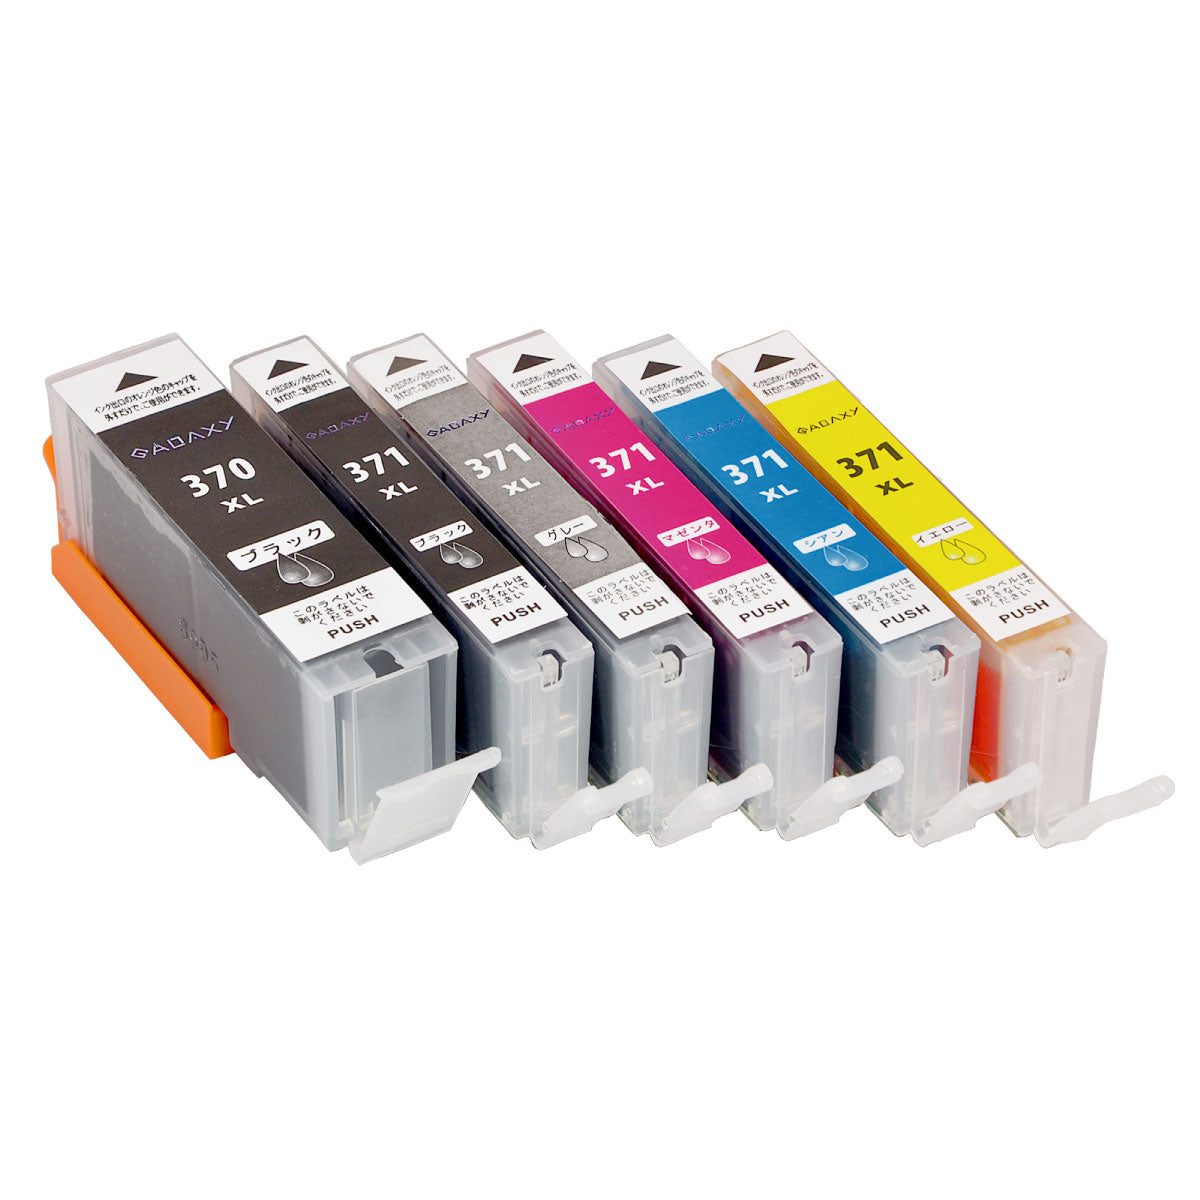 GALAXY] High Quality Canon Compatible Ink Cartridge BCI-371XL (BK/C/M